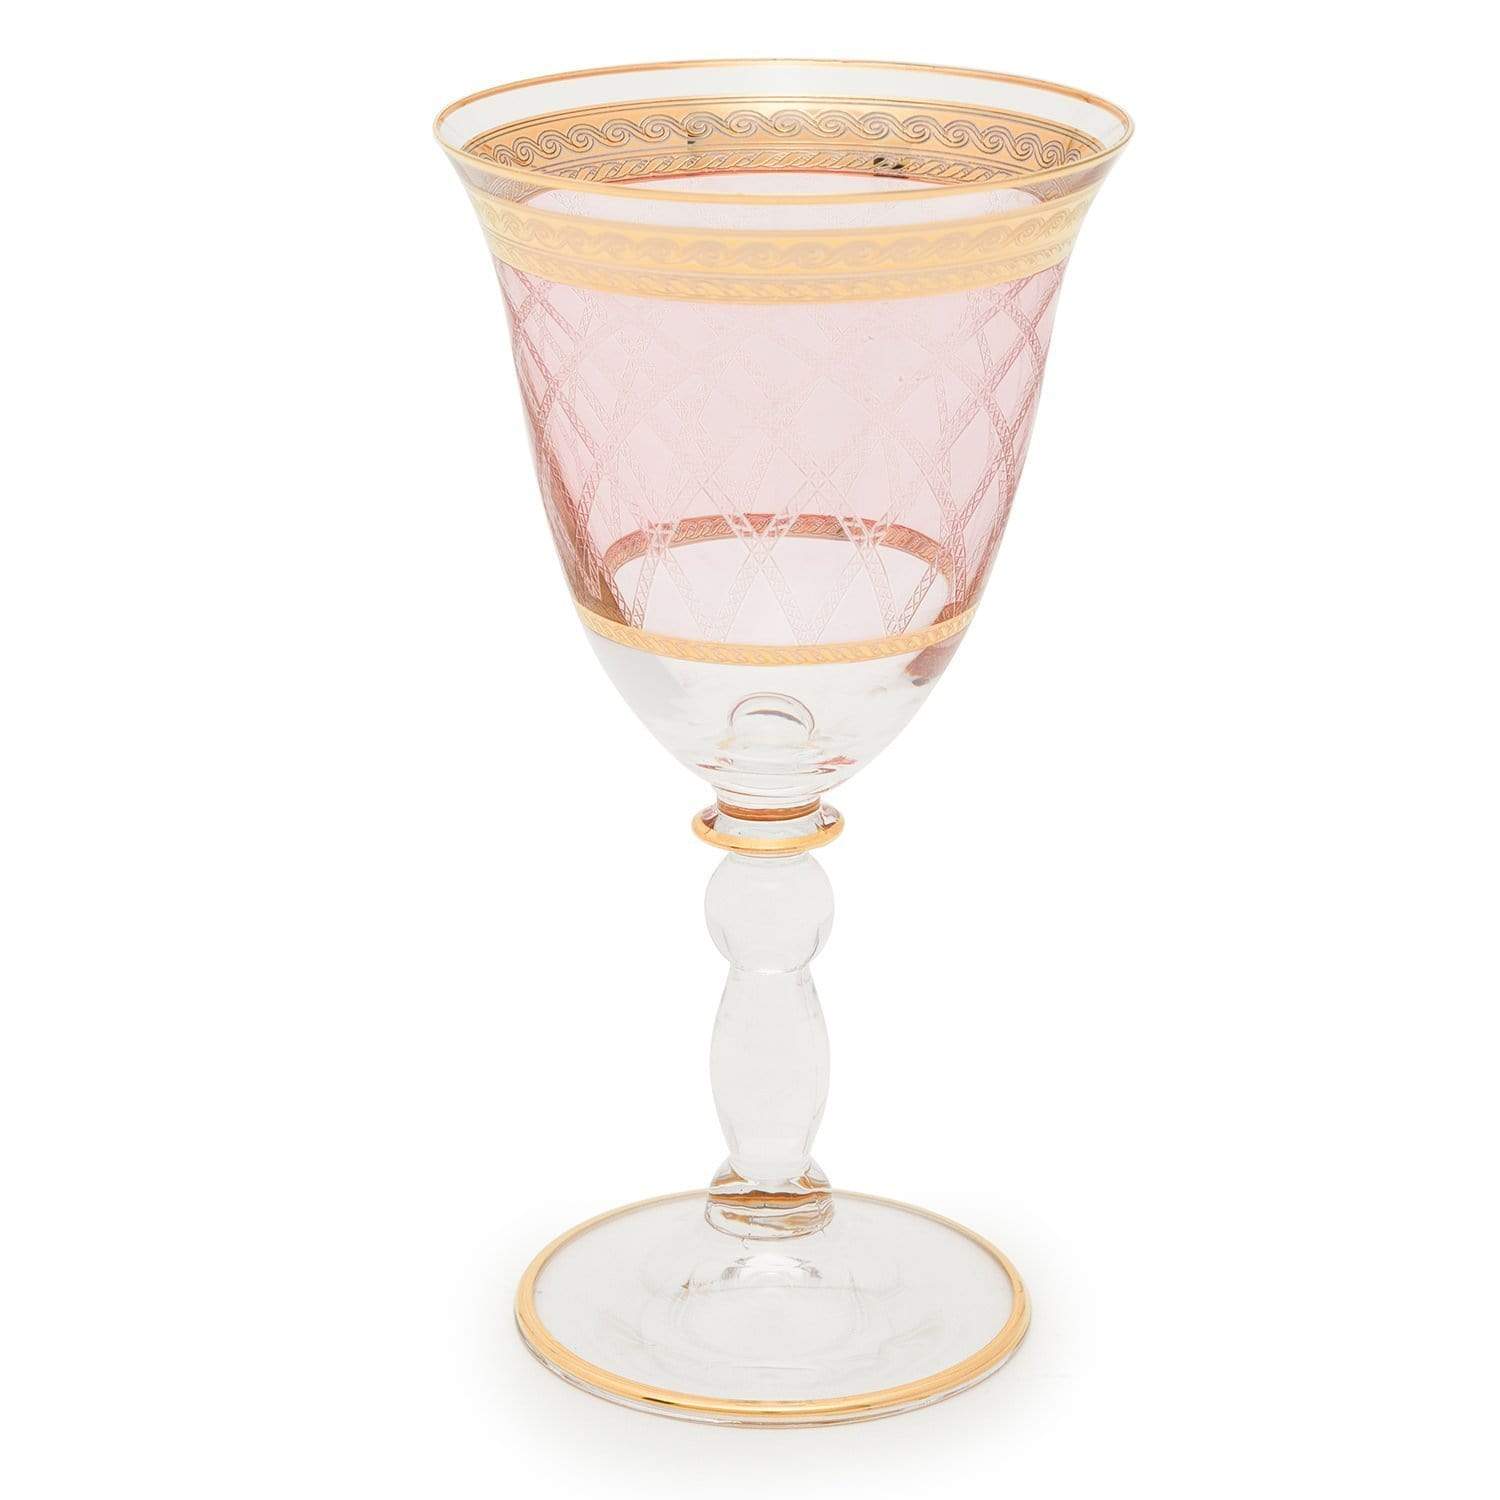 Combi Kolleen Goblet Set - Gold and Pink, 260 ml, Large, 6 Piece - G761Z/96 - Jashanmal Home